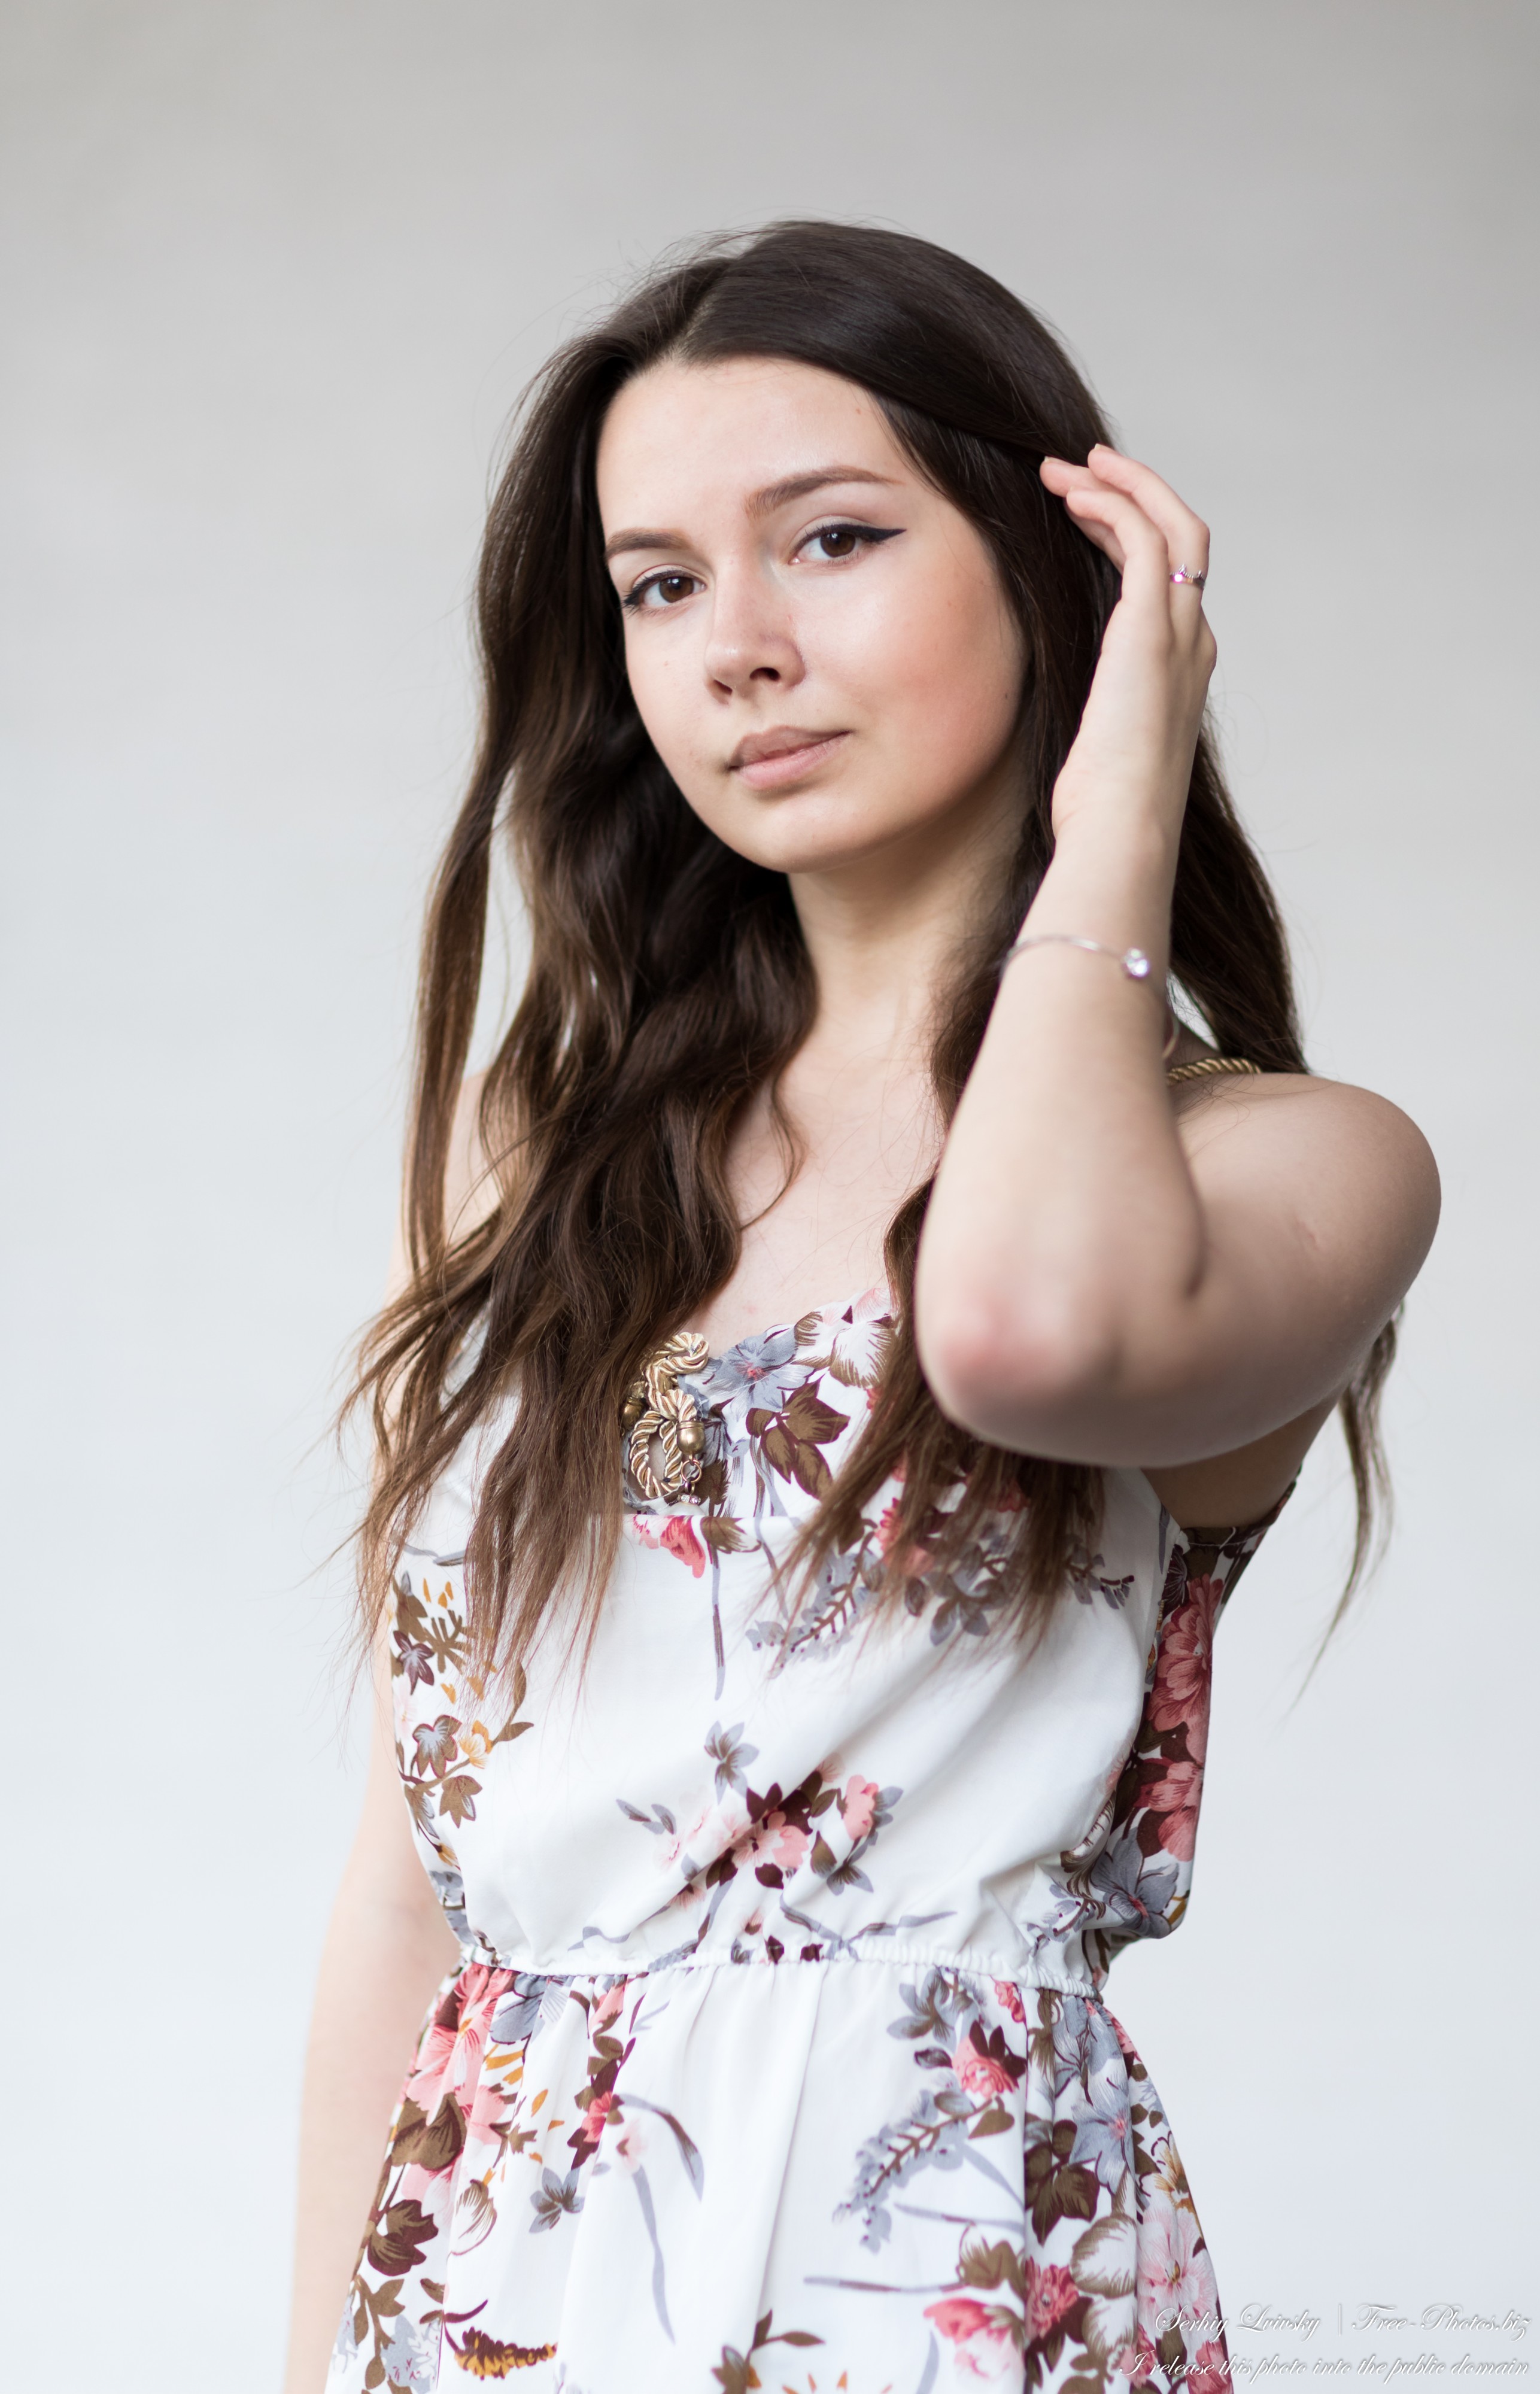 Photo Of Lida A 21 Year Old Girl Photographed By Serhiy Lvivsky In June 2020 Photograph 3